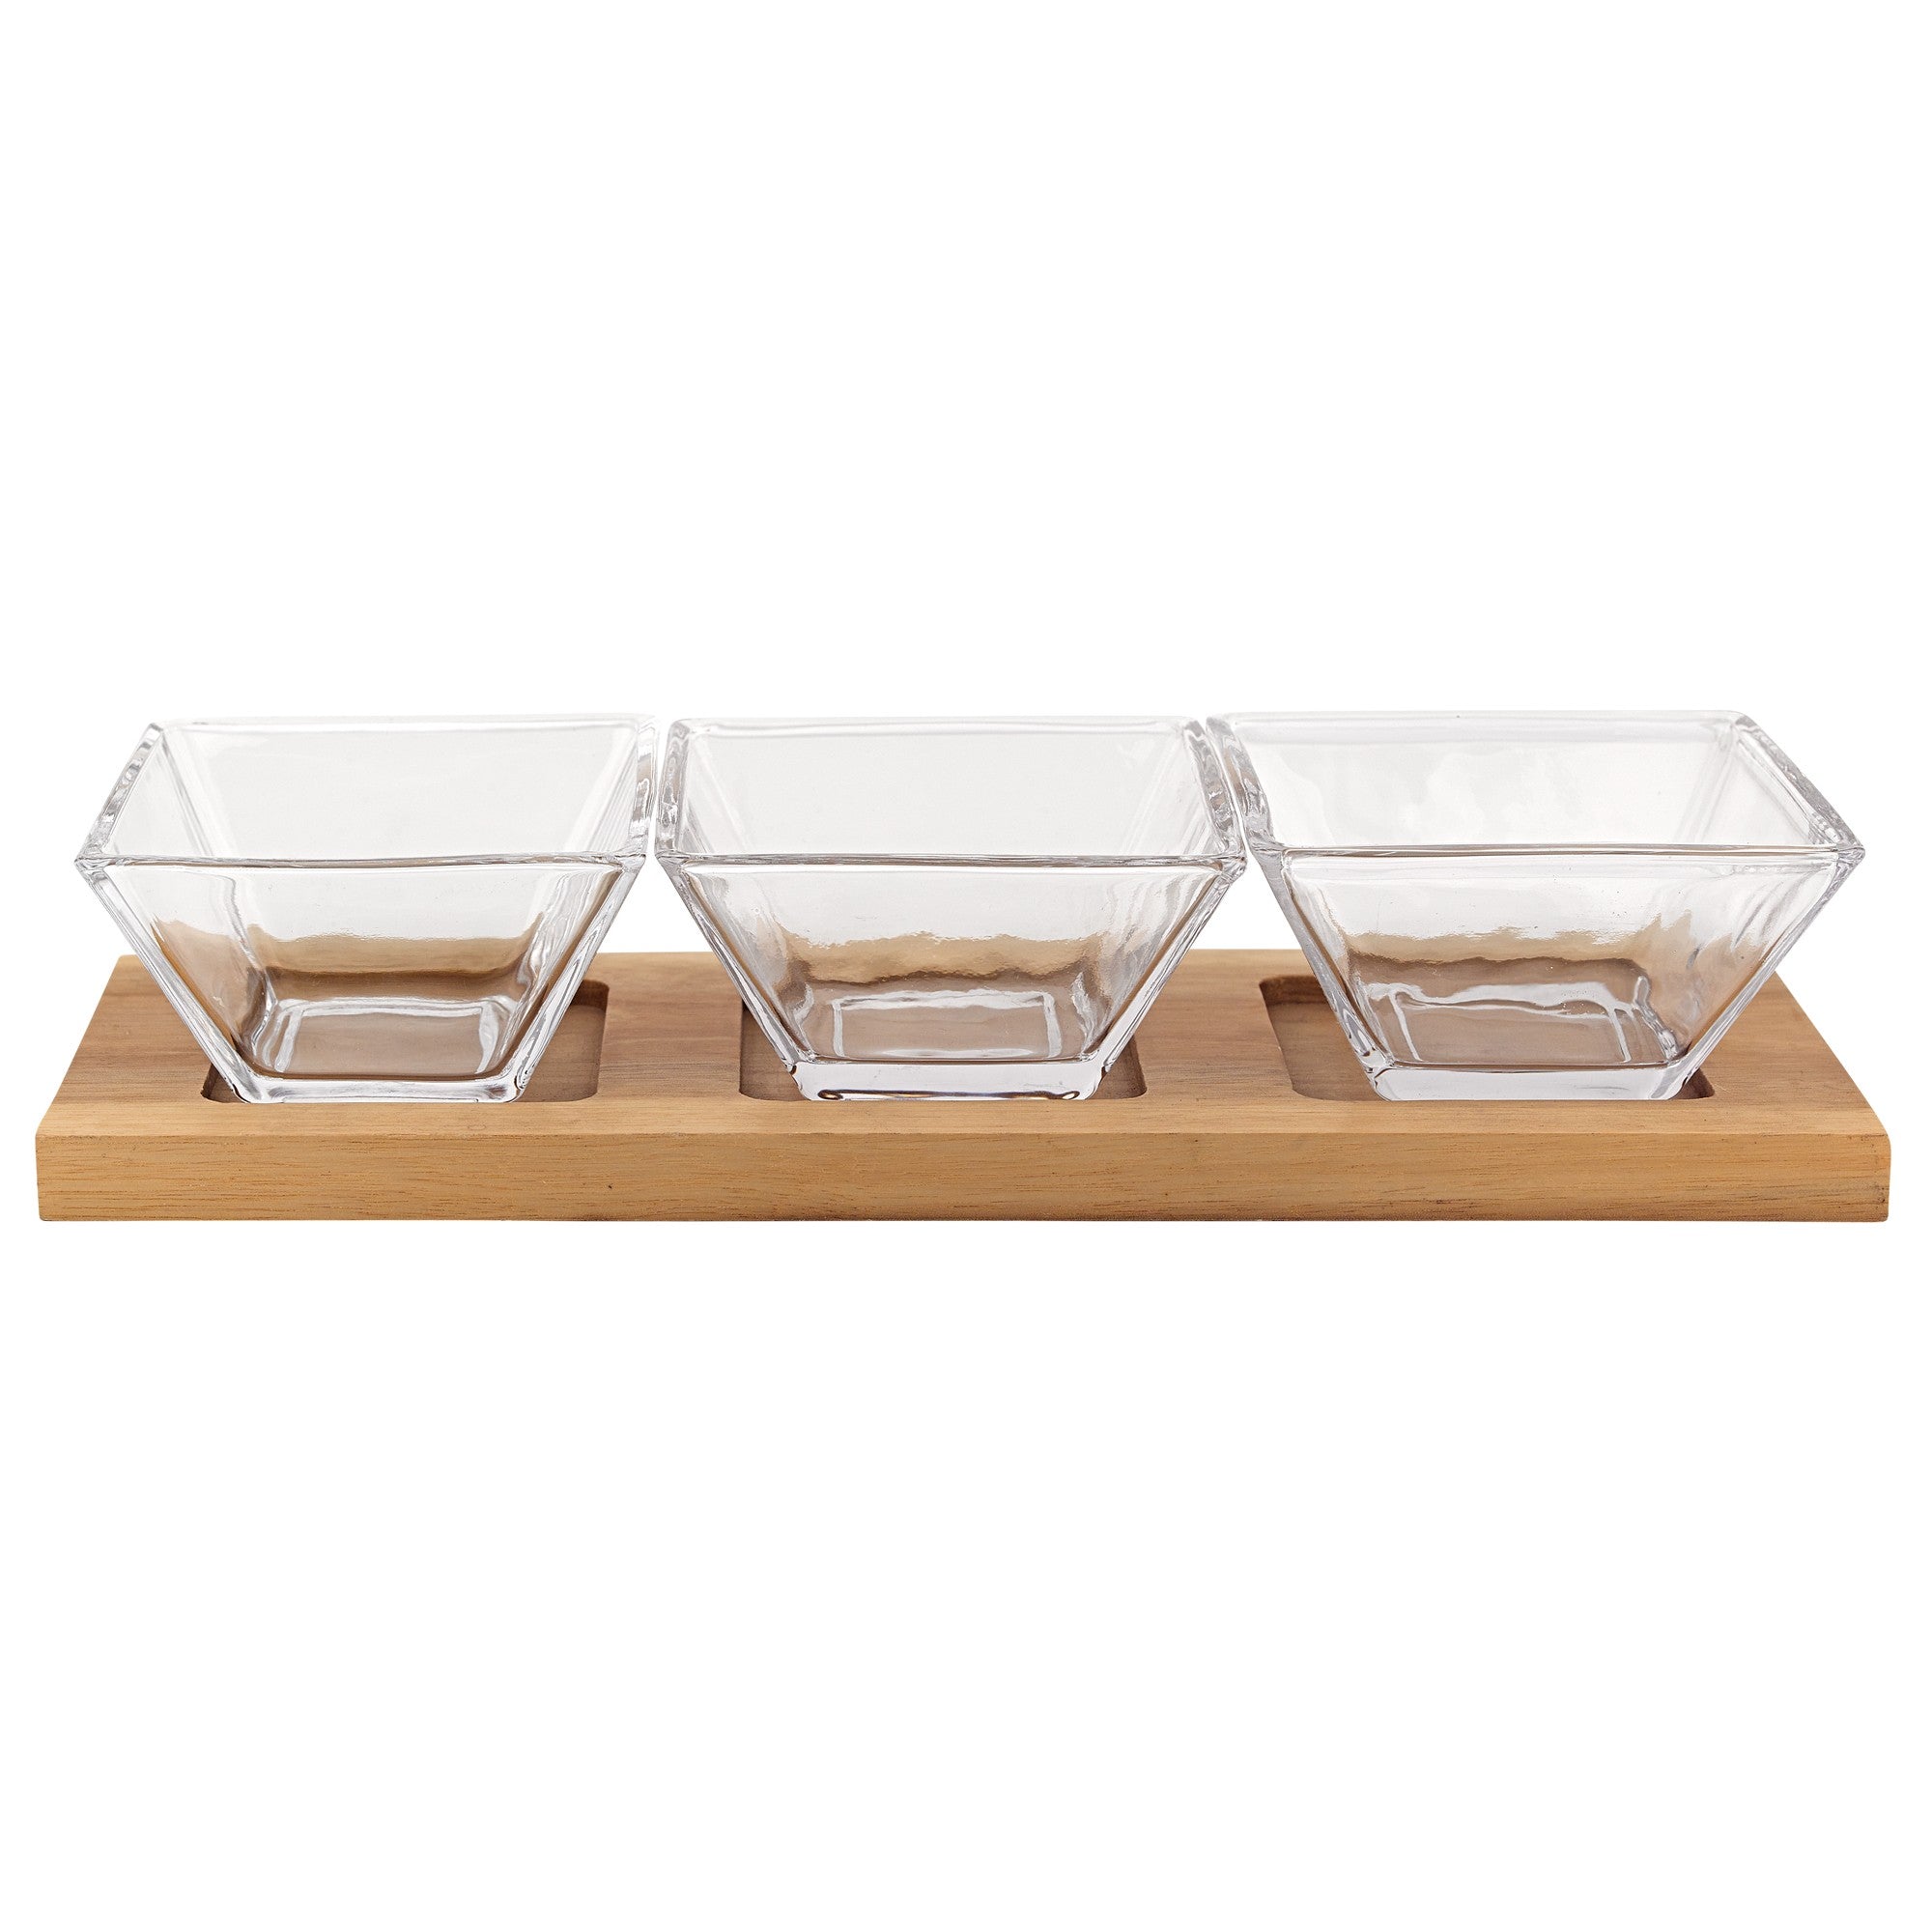 4-Mouth-Blown-Crystal-Hostess-Set-4-Pc-With-3-Glass-Condiment-Or-Dip-Bowls-On-A-Wood-Tray-Dinnerware-Sets